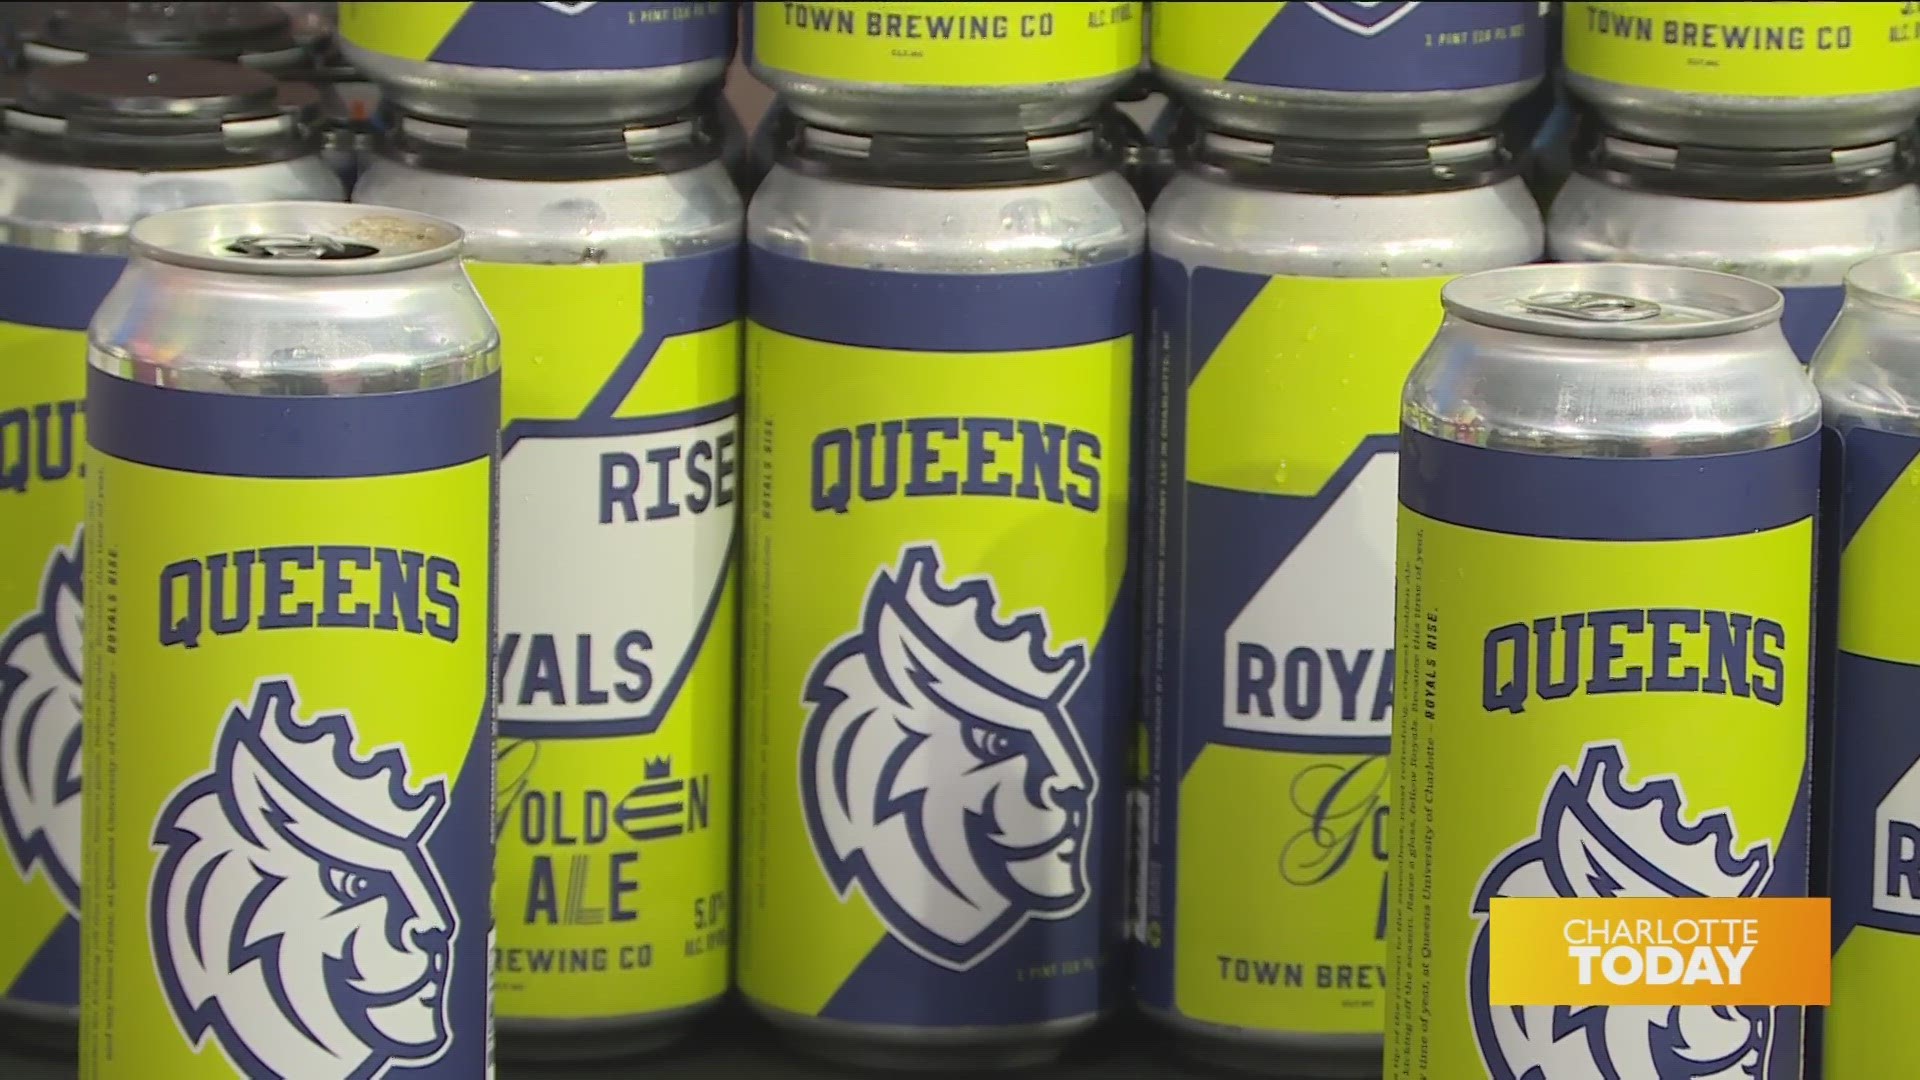 Enjoy the newest beer by Town Brewing & Queens University